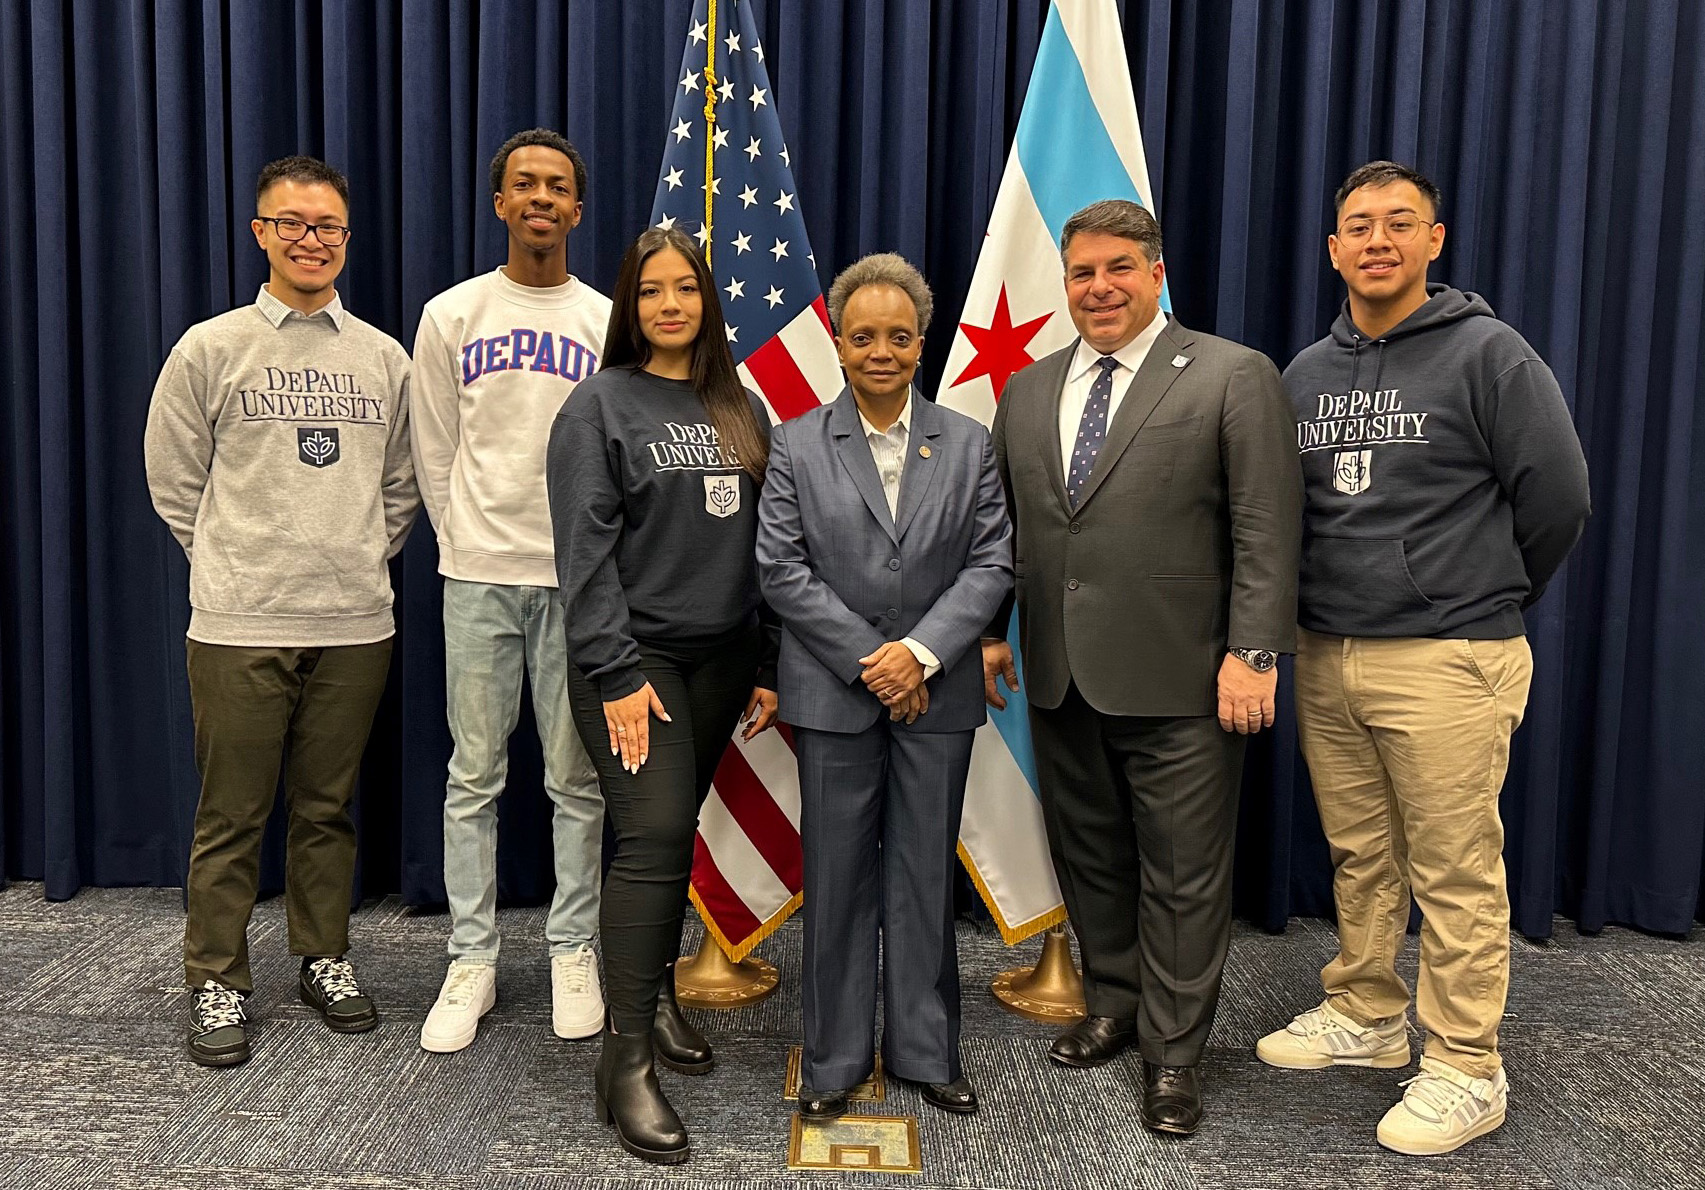 DePaul students with Lori Lightfoot and Rob Manuel